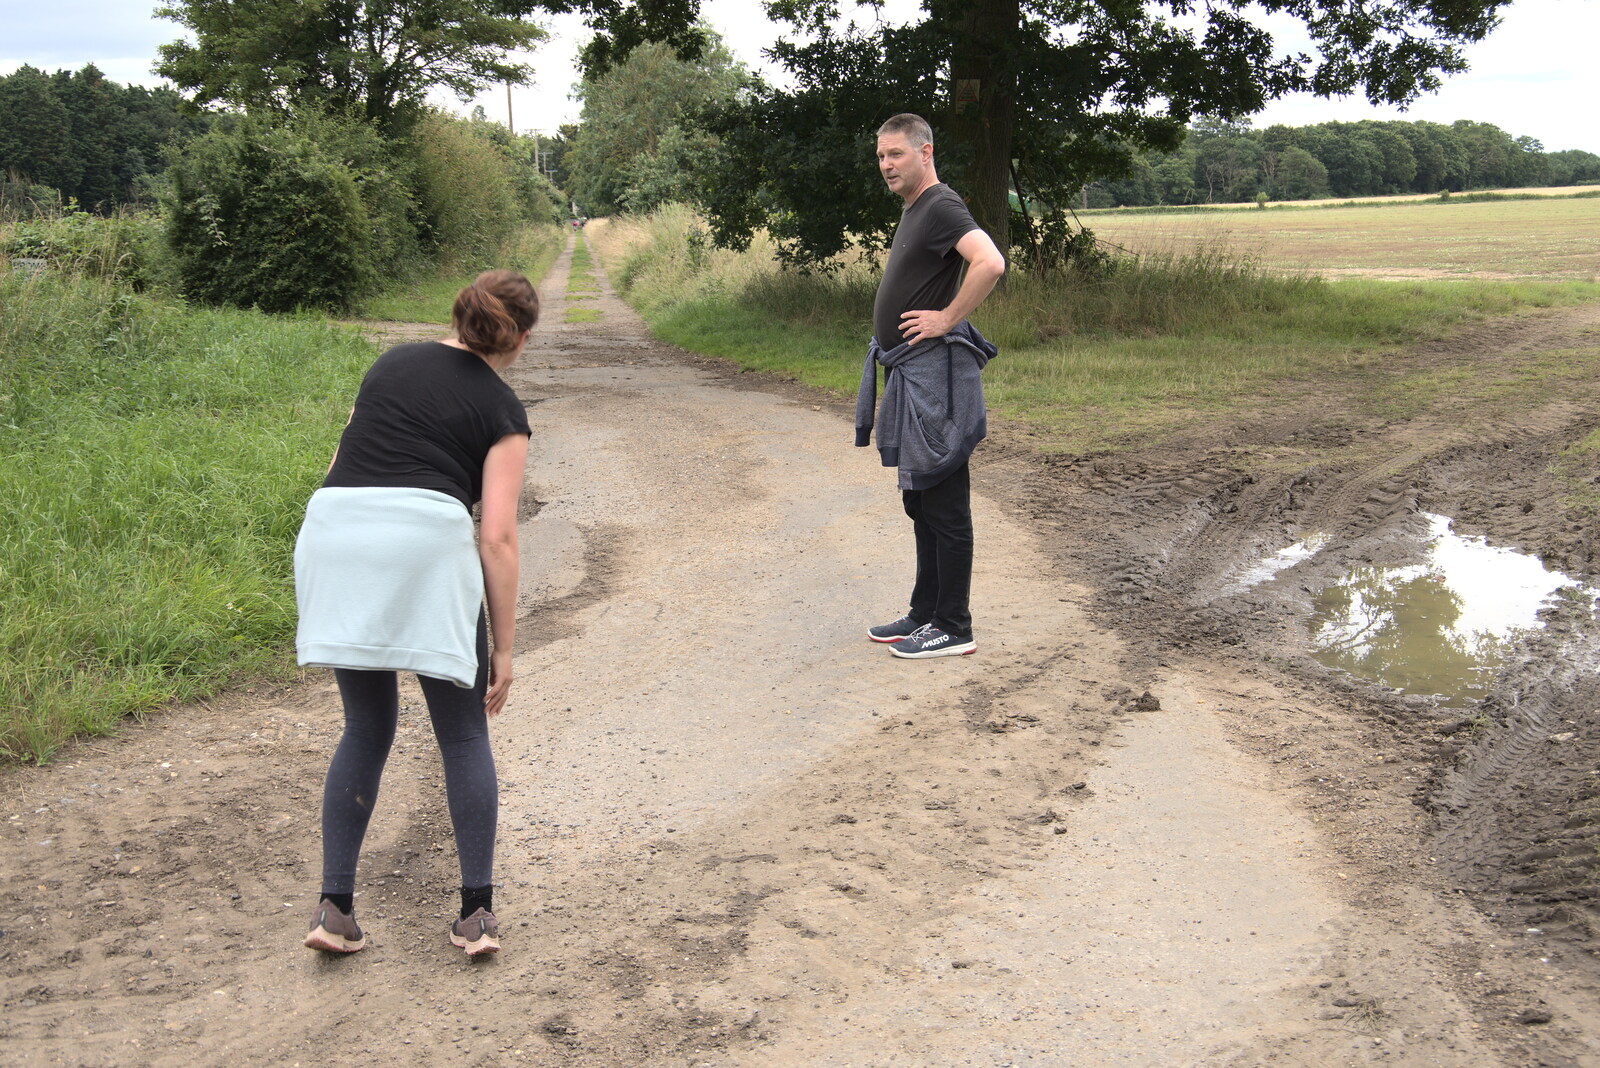 Isobel pauses on the Avenue from Meg-fest, and Sean Visits, Bressingham and Brome, Suffolk - 1st August 2021